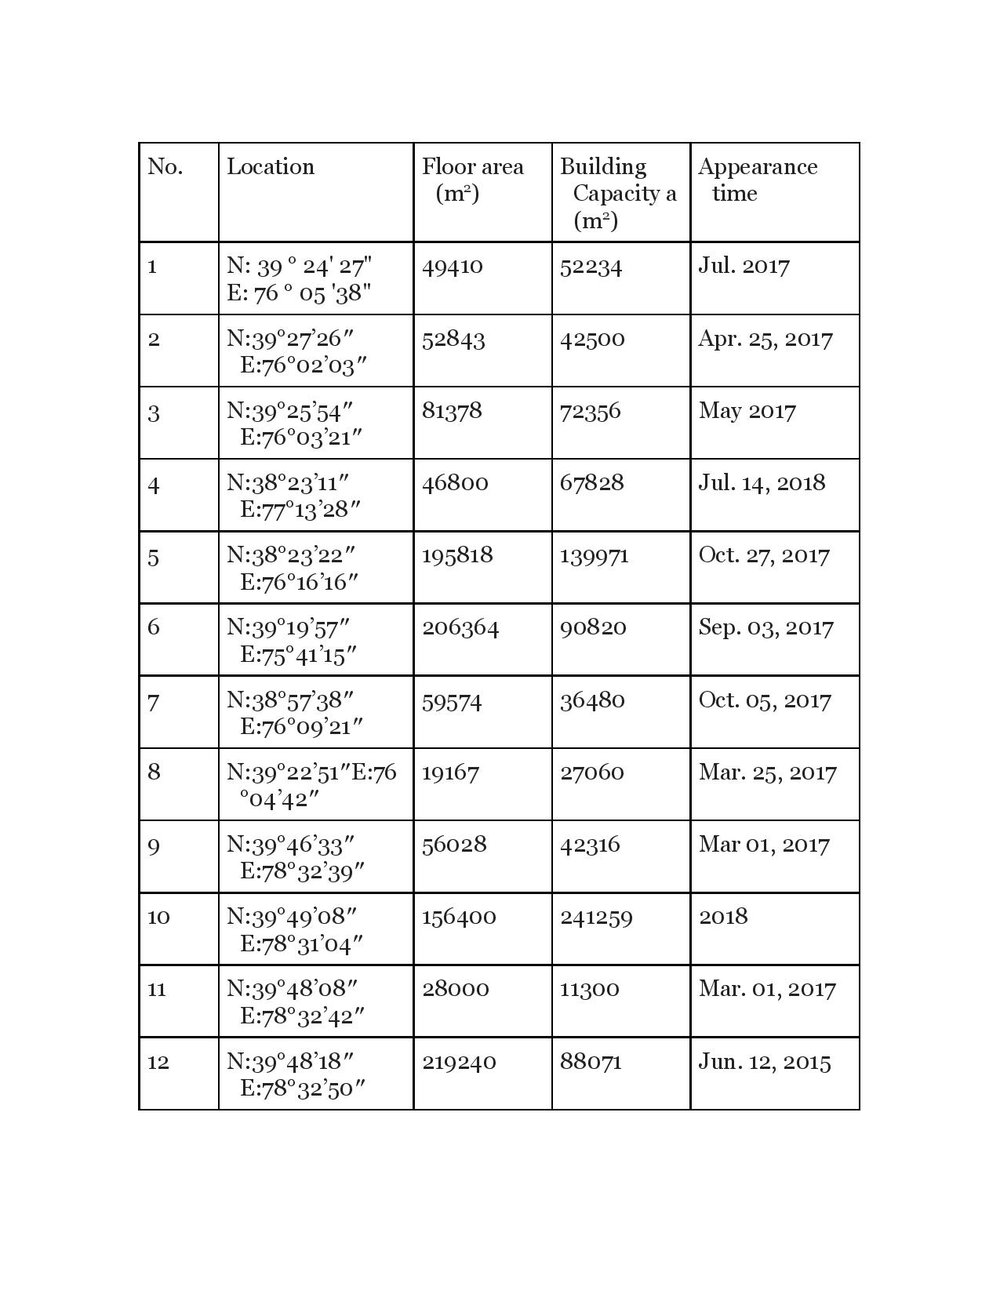 A table created by Li Fang  with information about possible re-education camps identified by Li Fang.